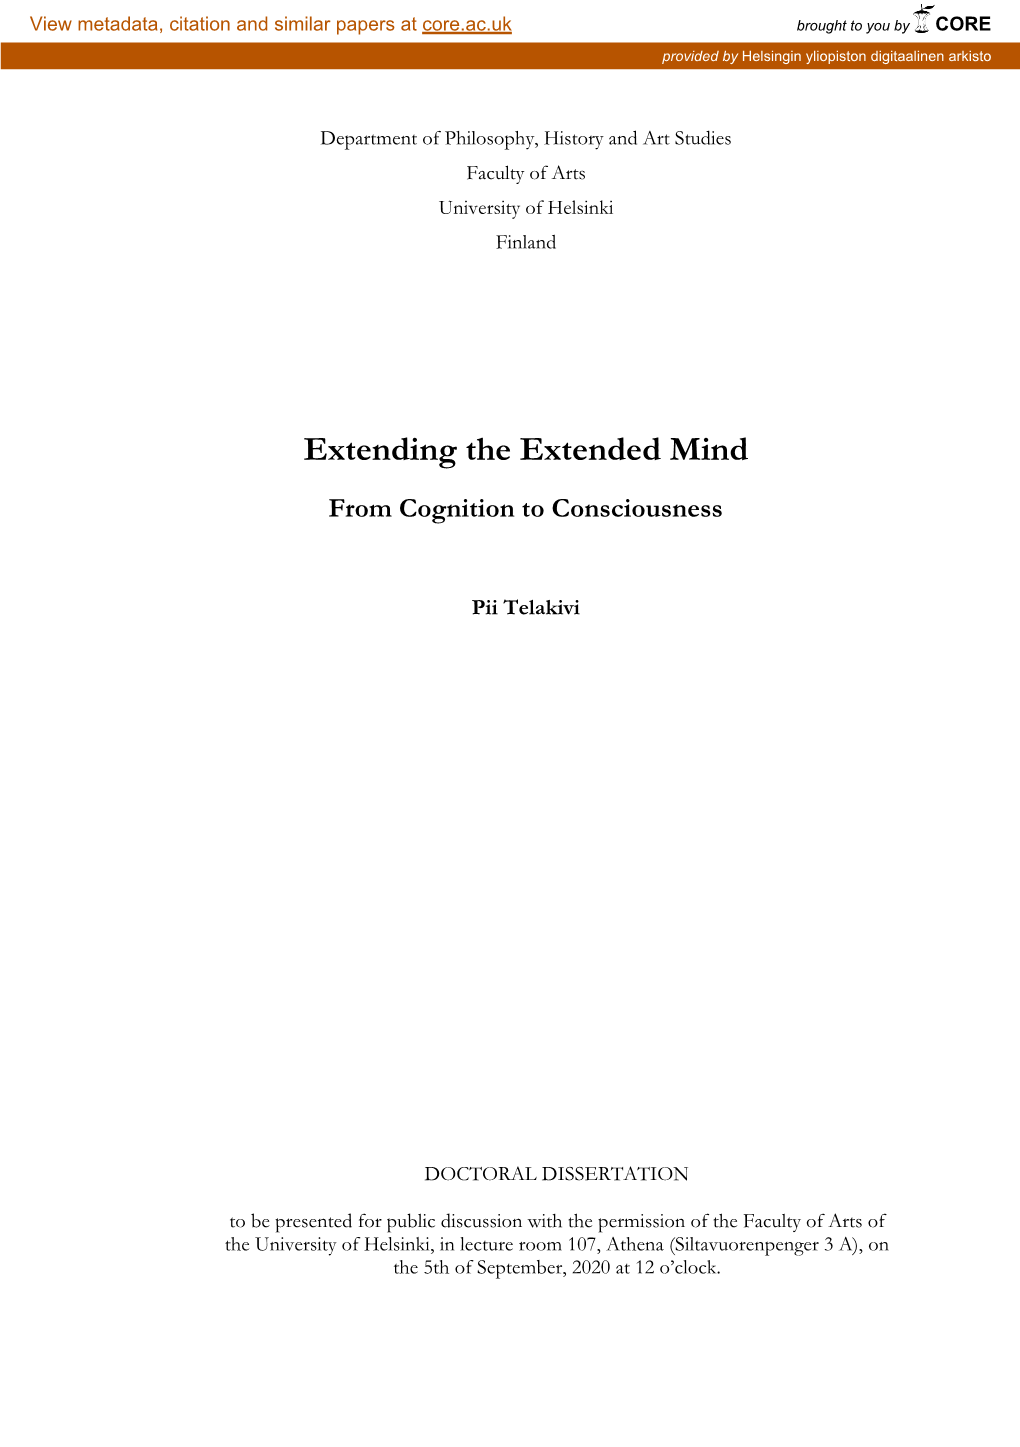 Extending the Extended Mind from Cognition to Consciousness